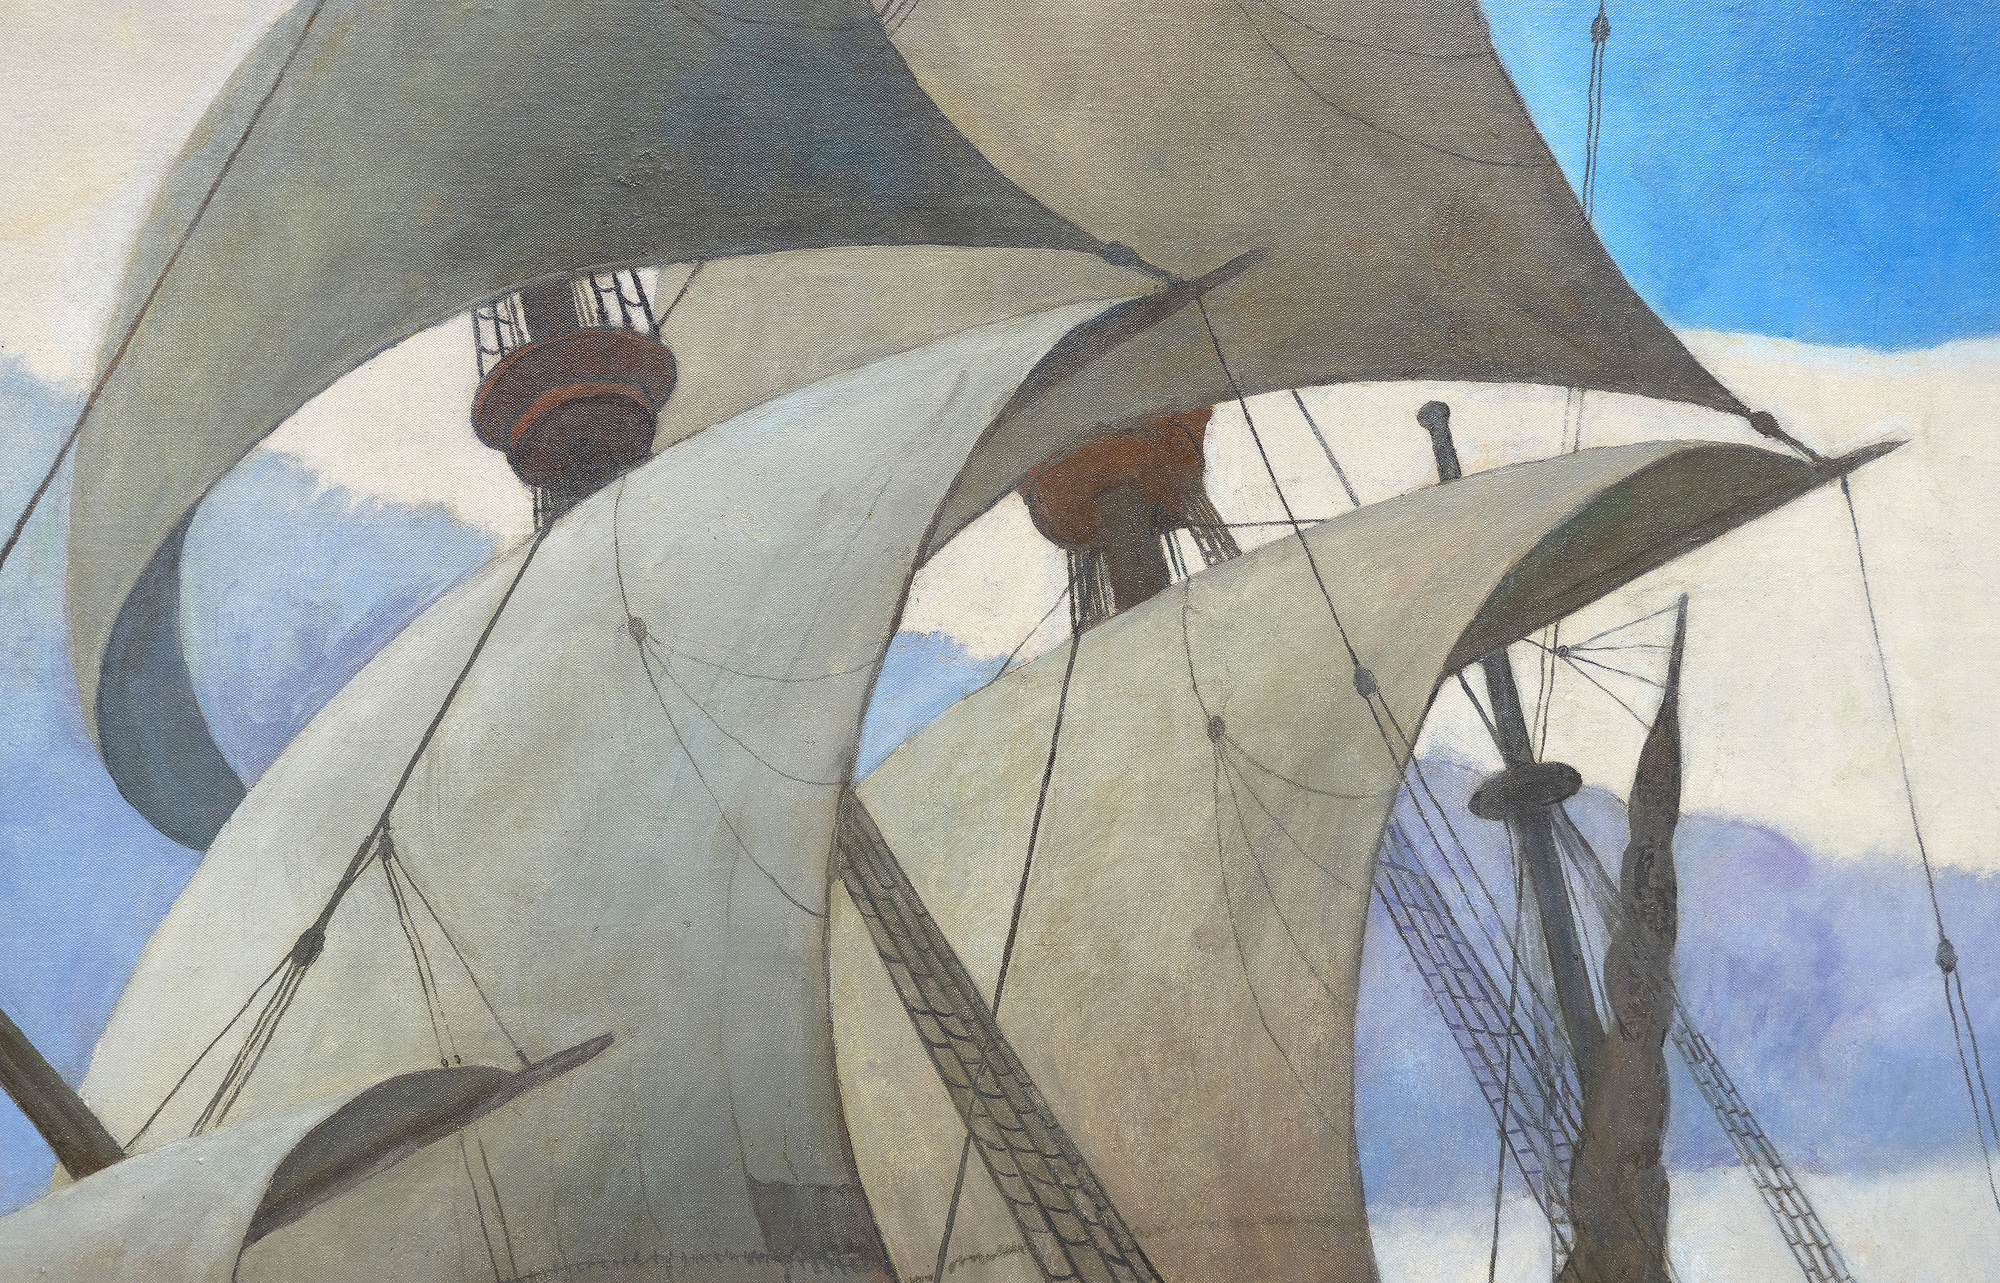 N.C. WYETH - The Coming of the Mayflower in 1620 - oil on canvas - 104 1/2 x 158 3/4 in.